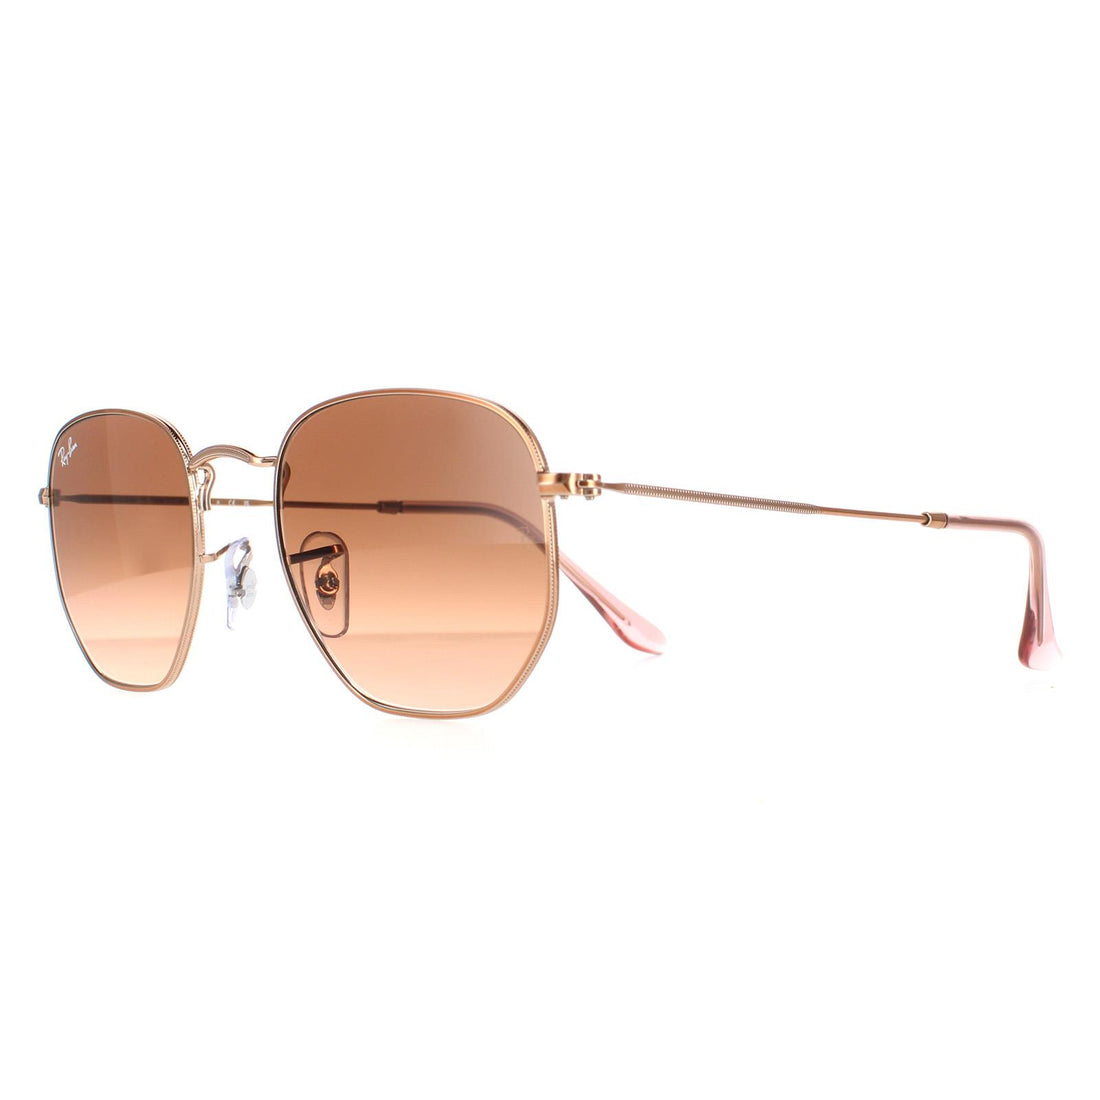 Ray-Ban Sunglasses Hexagonal RB3548N 9069A5 Polished Bronze Copper Brown Gradient